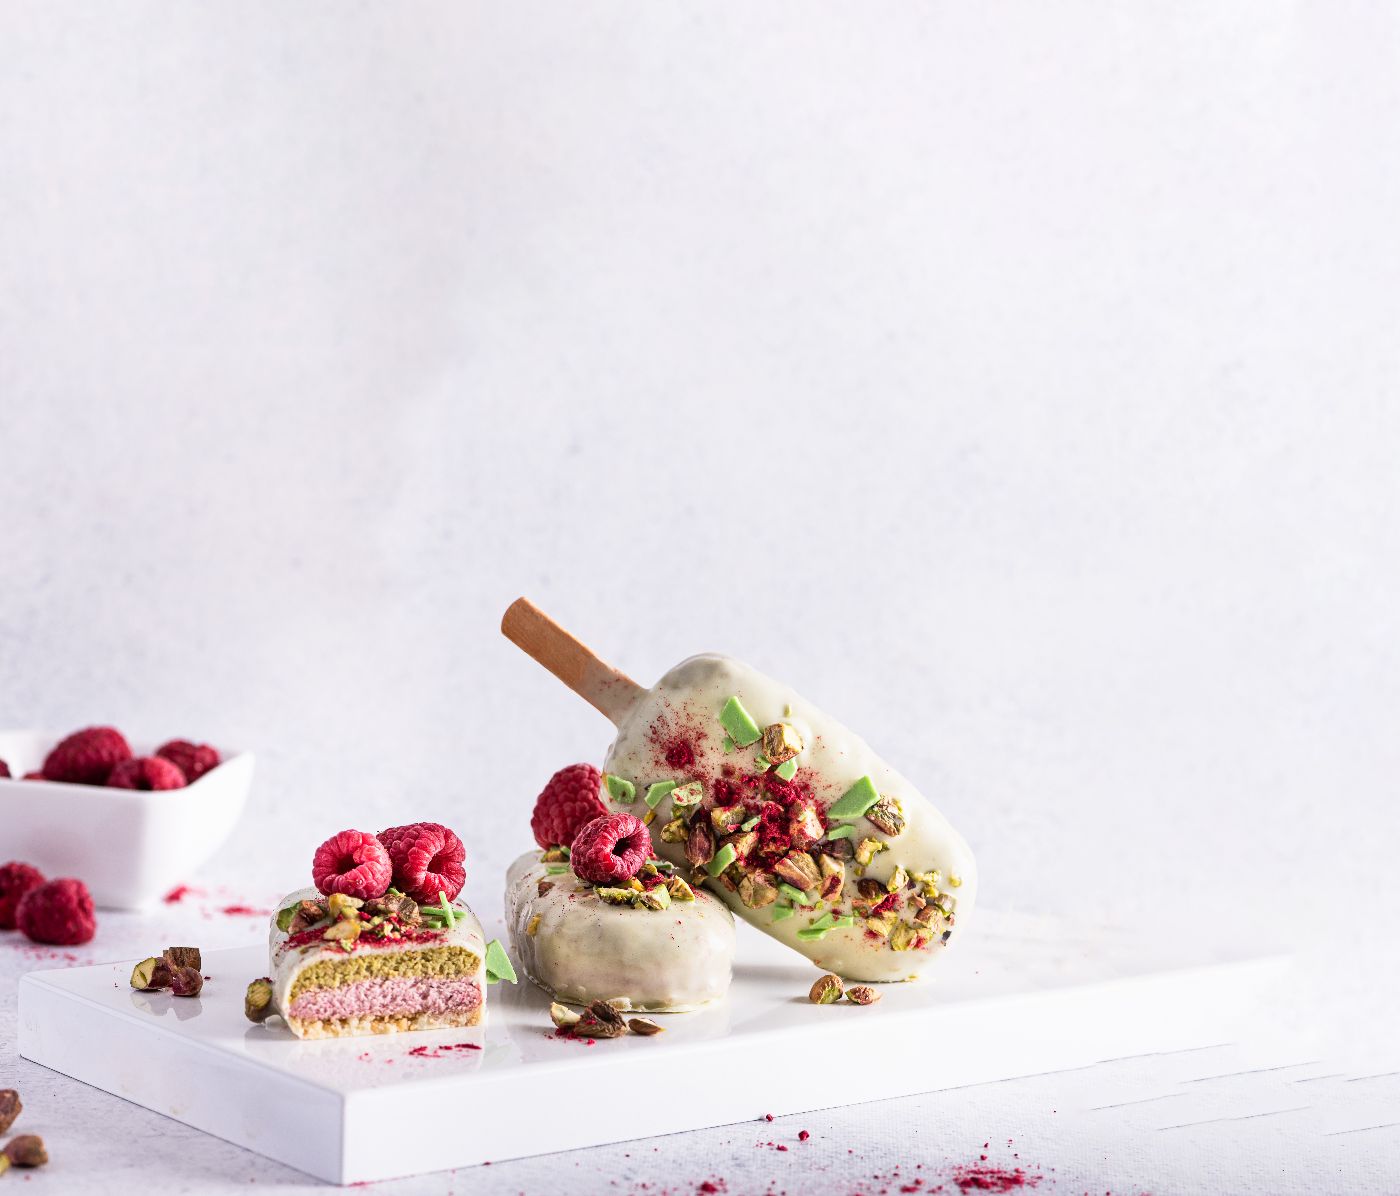 Ice-cream-sticks-with-white-chocolate,-fruit,-pistachios-and-colored-sugar-on-a-white-background.-1299642877_4378x3502 a3.jpg